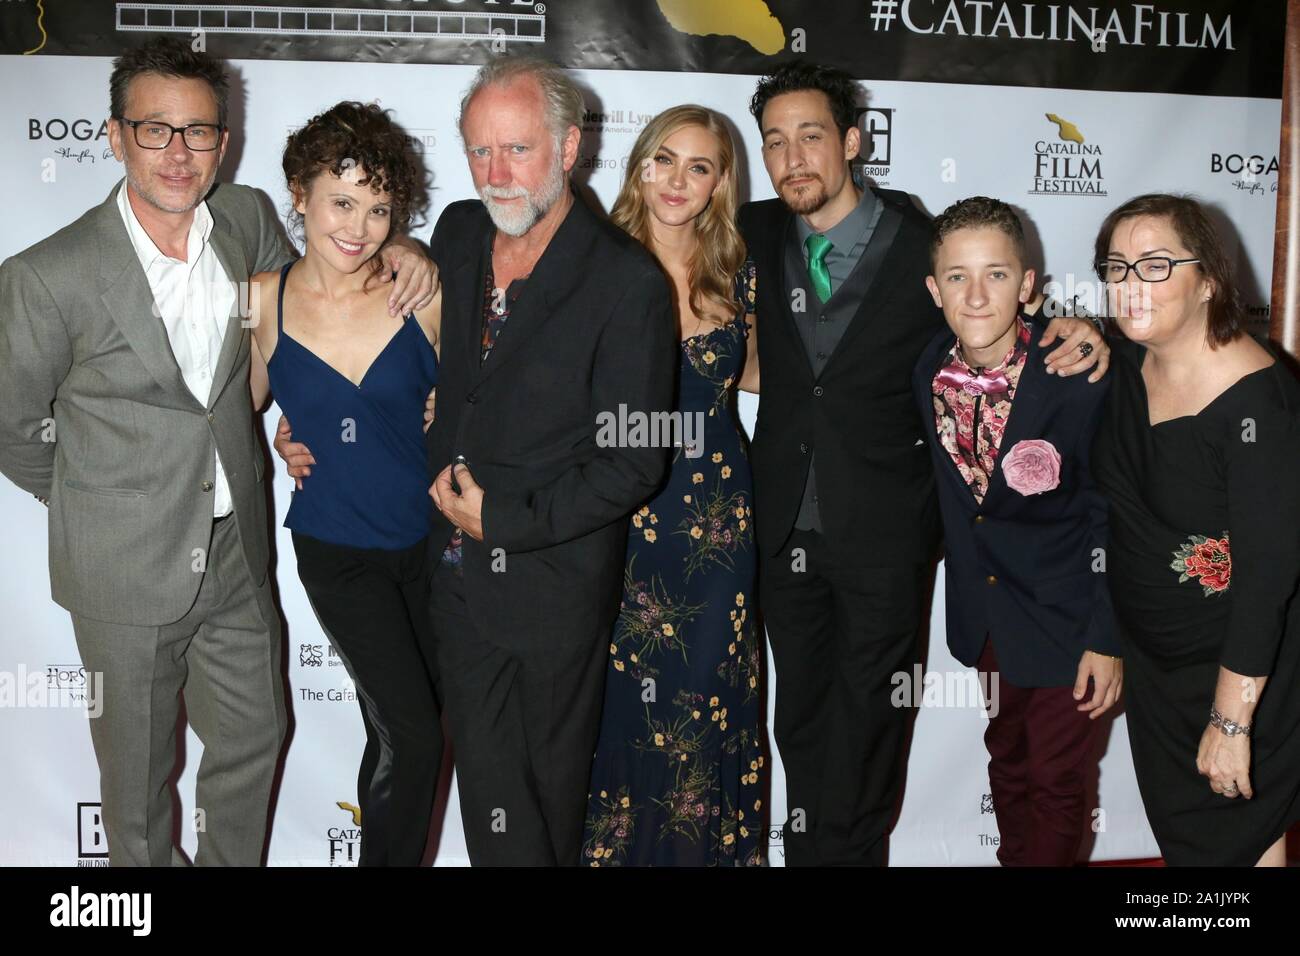 Long Beach, CA. 26th Sep, 2019. Connor Trinneer, Reiko Aylesworth, Xander Berkeley, Jessica Sipos, Sterling Hurst, Nickolas Wolf, Jillian Armenante at arrivals for Catalina Film Festival - THU, RMS Queen Mary, Long Beach, CA September 26, 2019. Credit: Priscilla Grant/Everett Collection/Alamy Live News Stock Photo